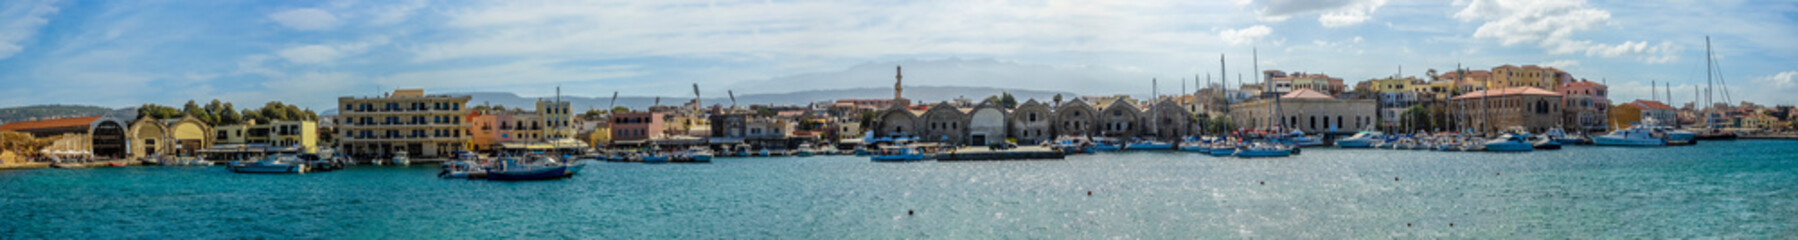 A wide panorama view of the inner harbour of Chania, Crete on a bright sunny day